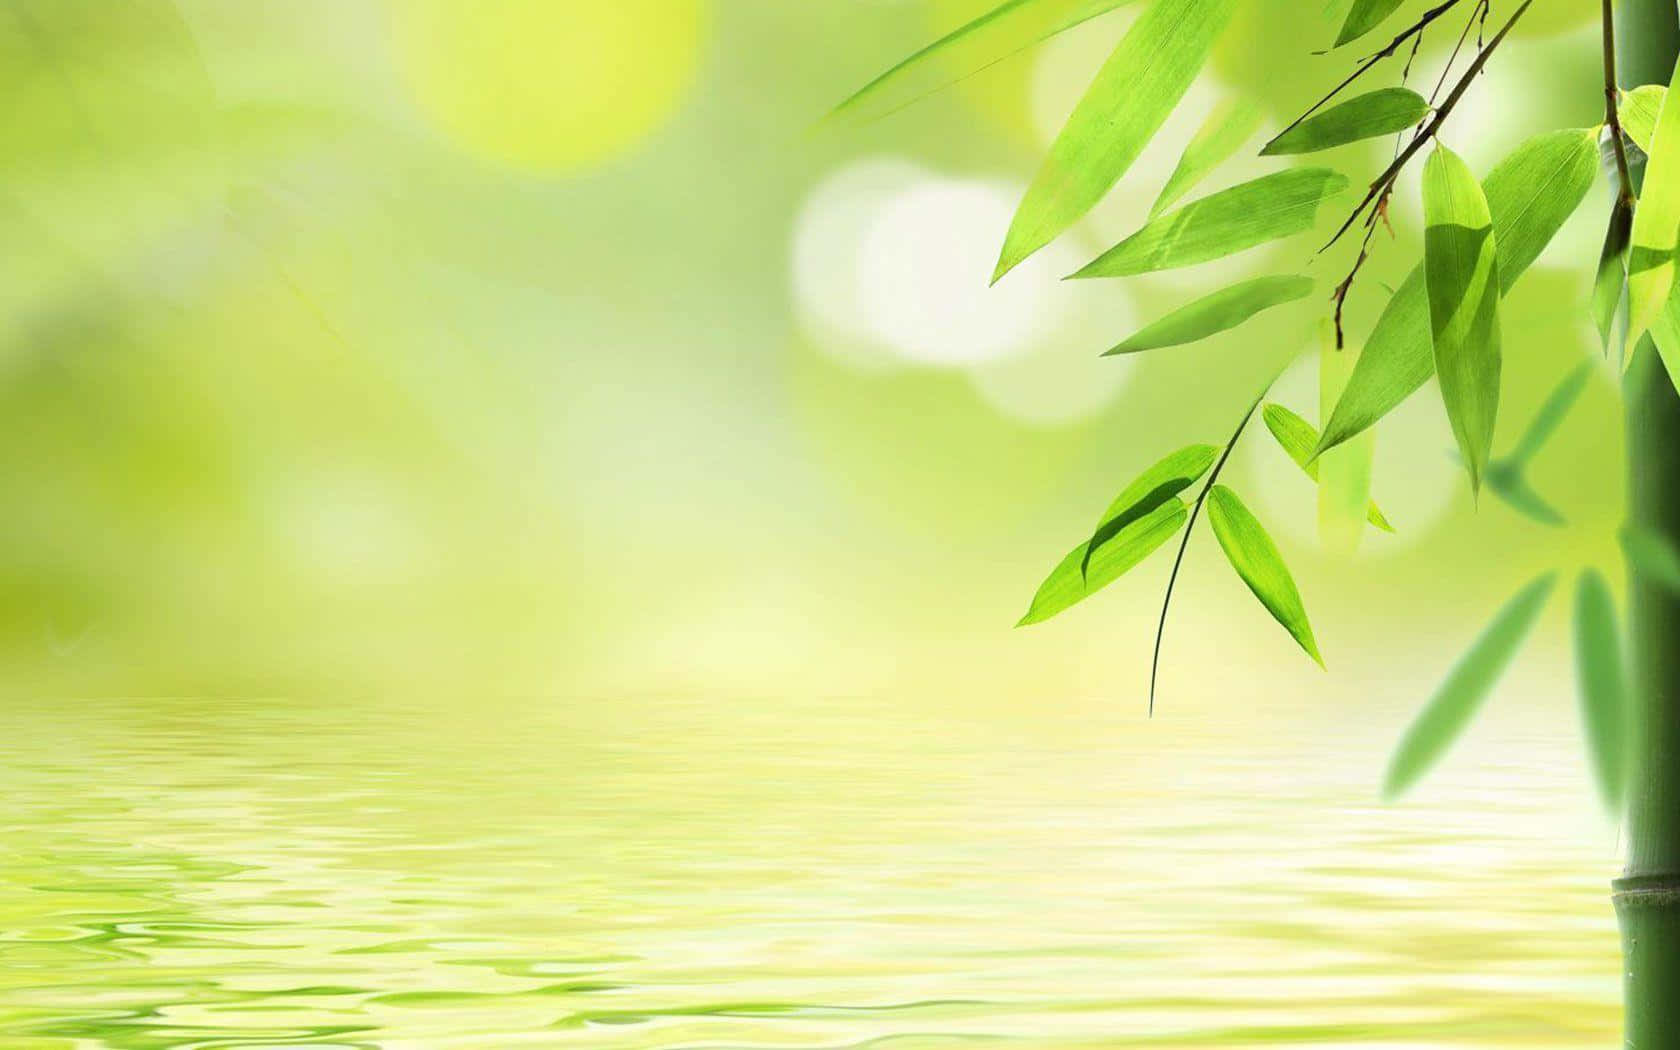 Bamboo Tree In Water With Green Leaves Wallpaper